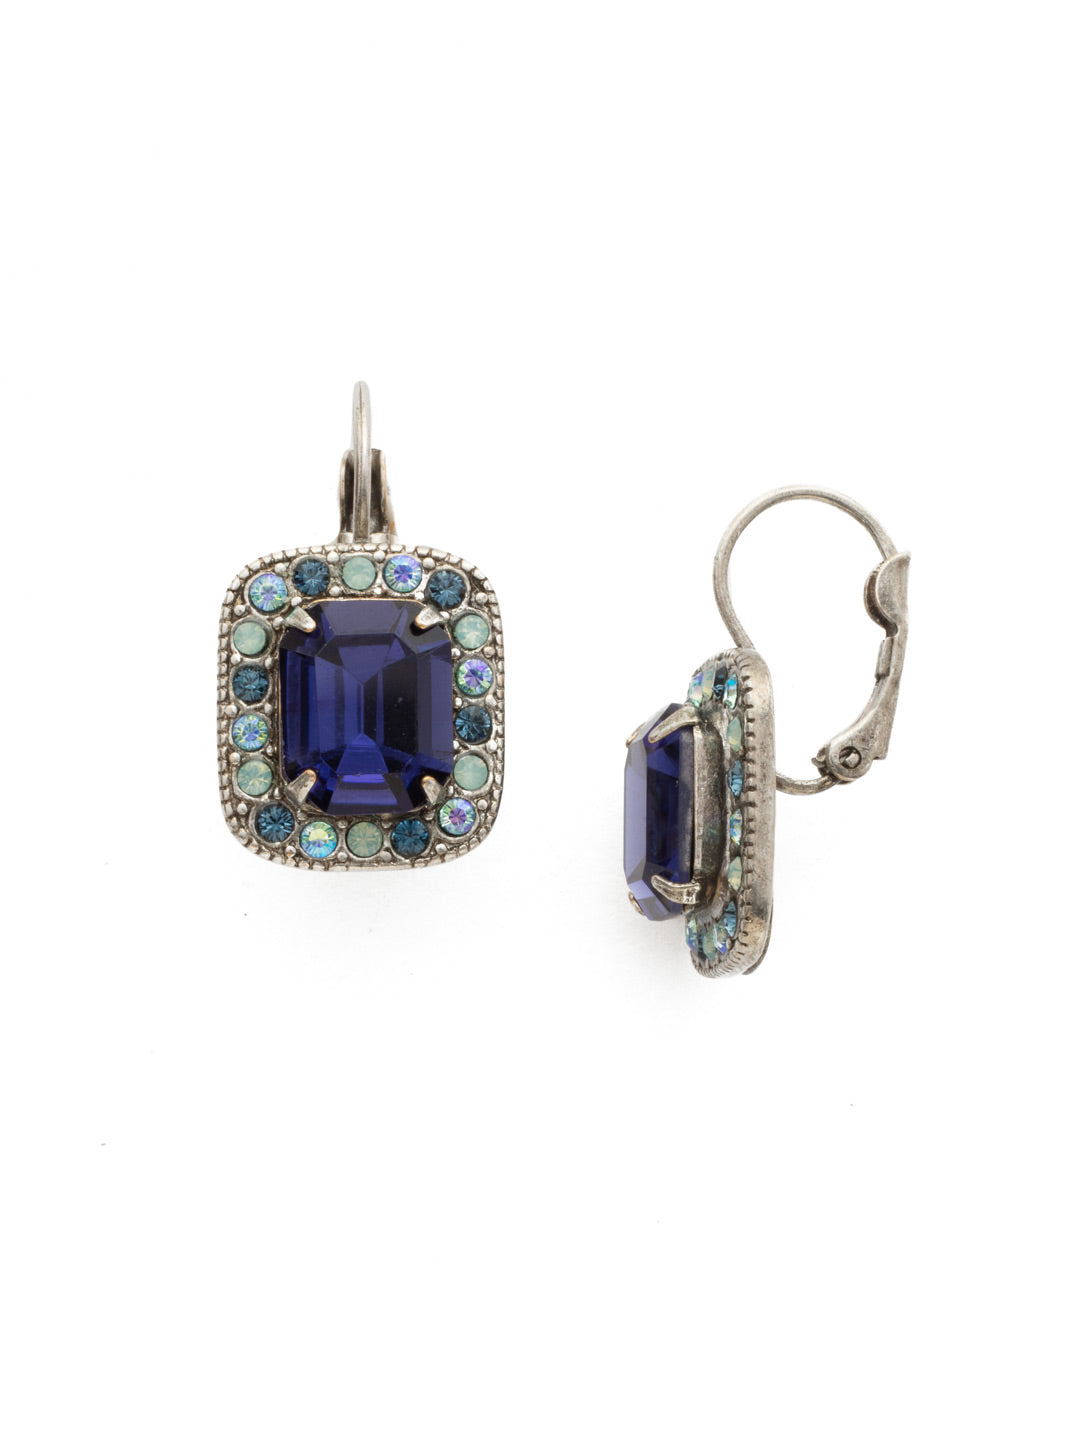 Opulent Octagon Dangle Earrings - EDQ50ASMLS - A central crystal surrounded by petite gems in a rectangular setting. From Sorrelli's Moonlit Shores collection in our Antique Silver-tone finish.